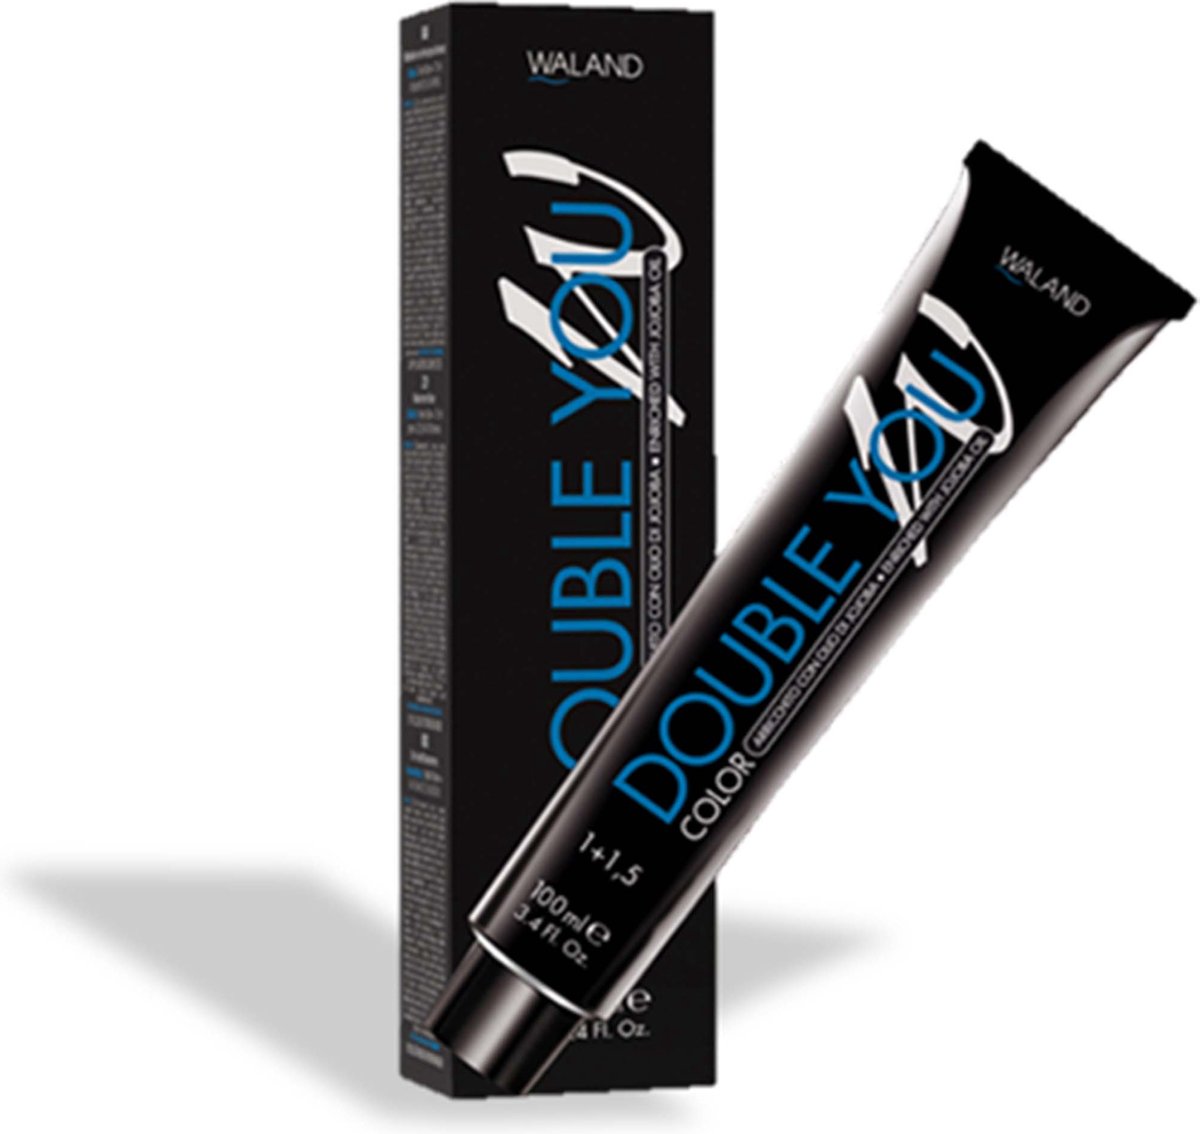 Waland Double You 7.0 Blond 100ml